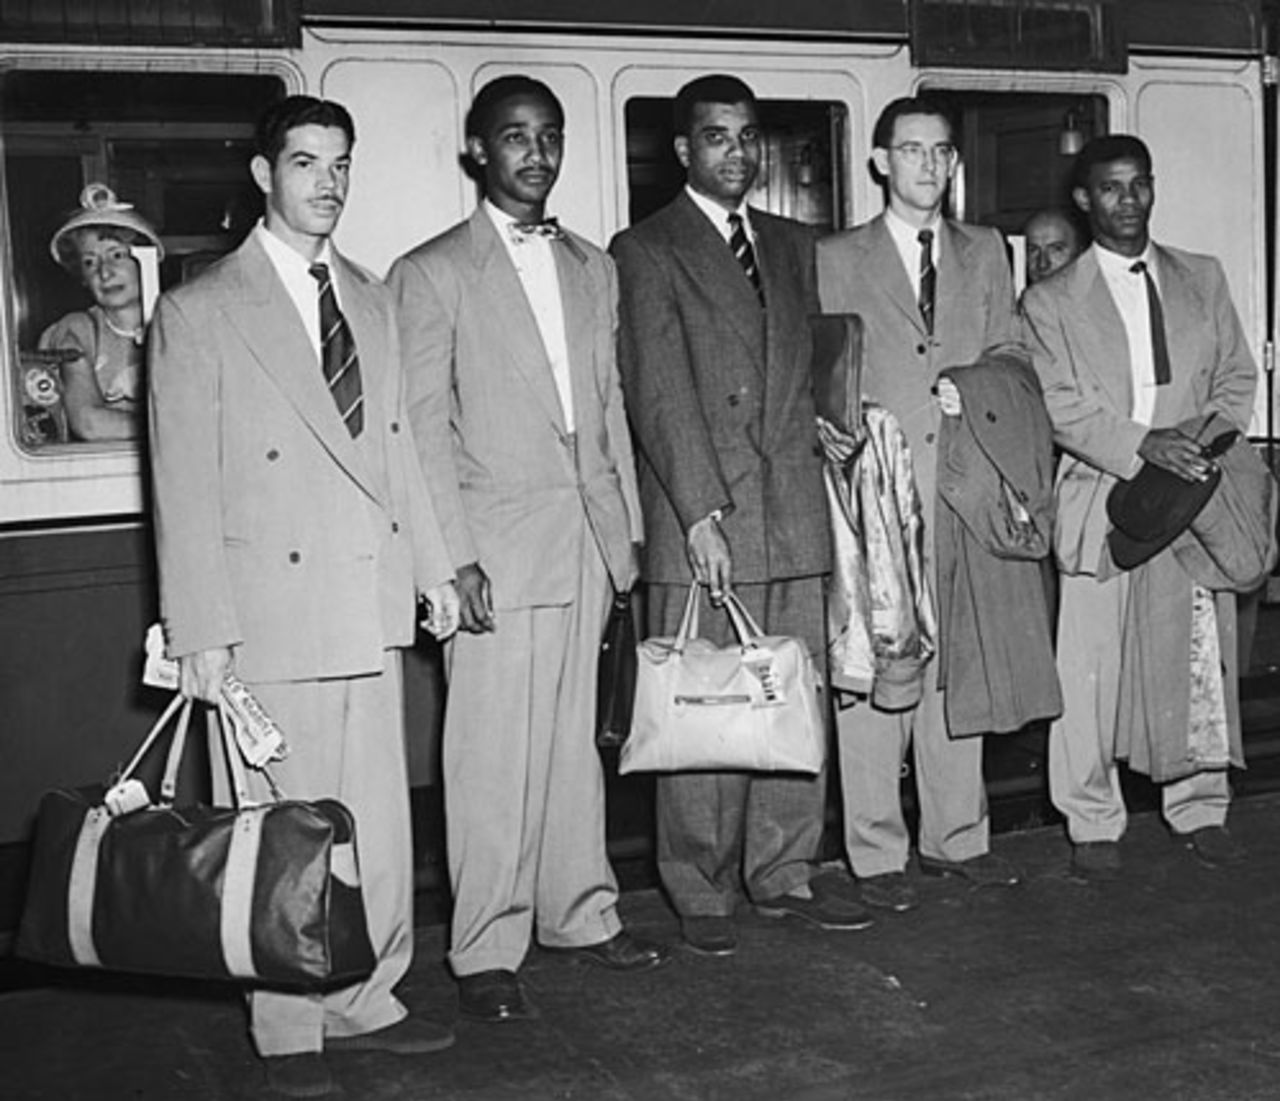 Kenneth Richards, Frank Worrell, Clyde Walcott, Roy Marshall and Everton Weekes at St Pancras station on their way to Australia, London, September 13, 1951